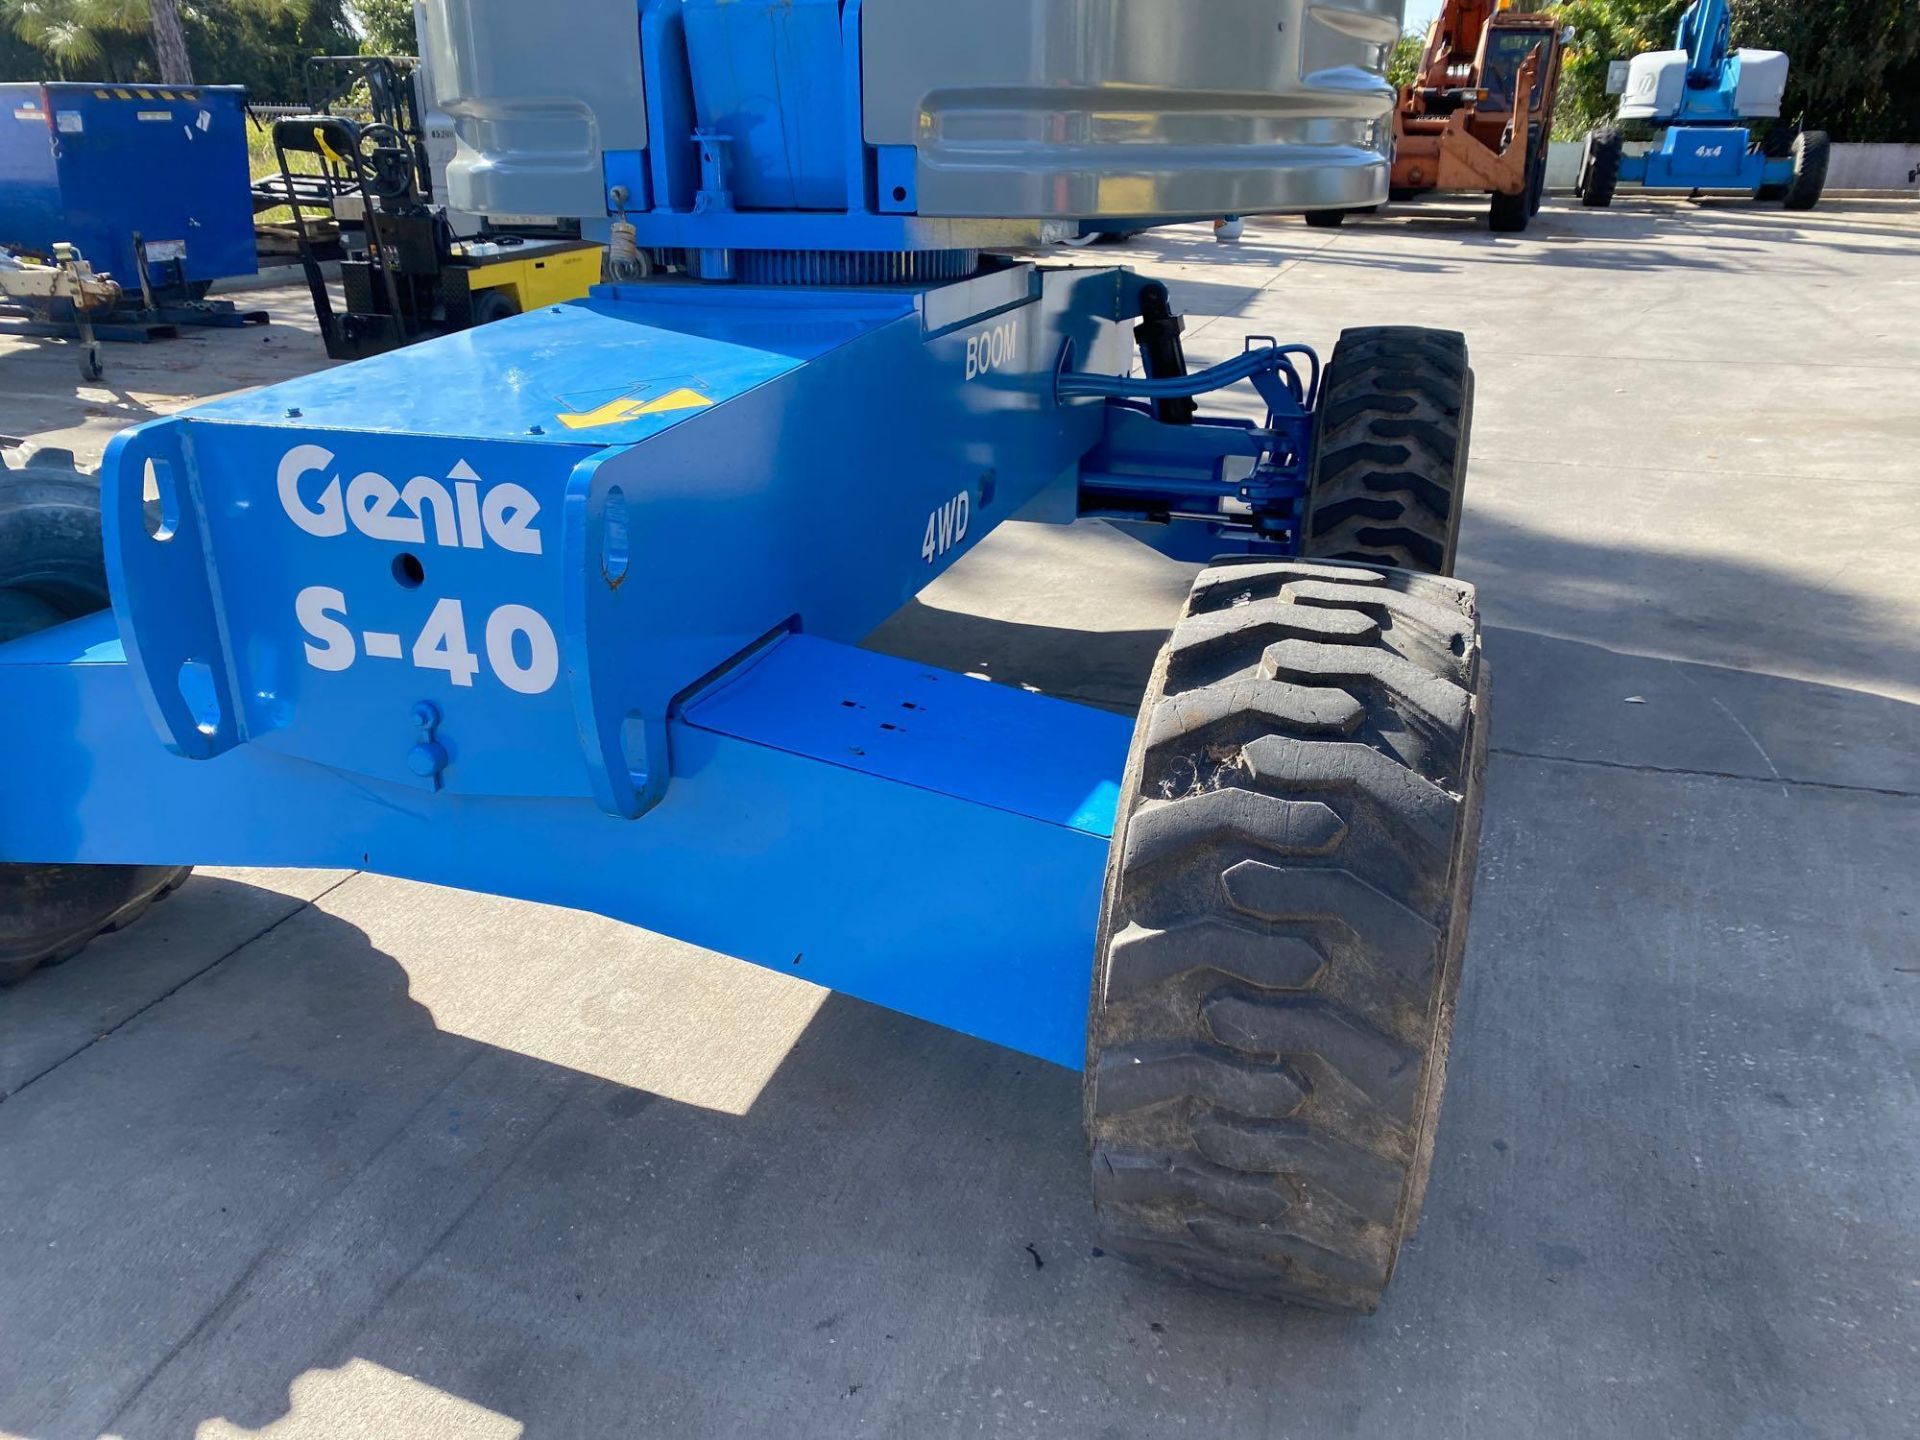 GENIE S-40 DIESEL BOOM LIFT, 4x4, 40' PLATFORM HEIGHT, RUNS AND OPERATES - Image 6 of 18